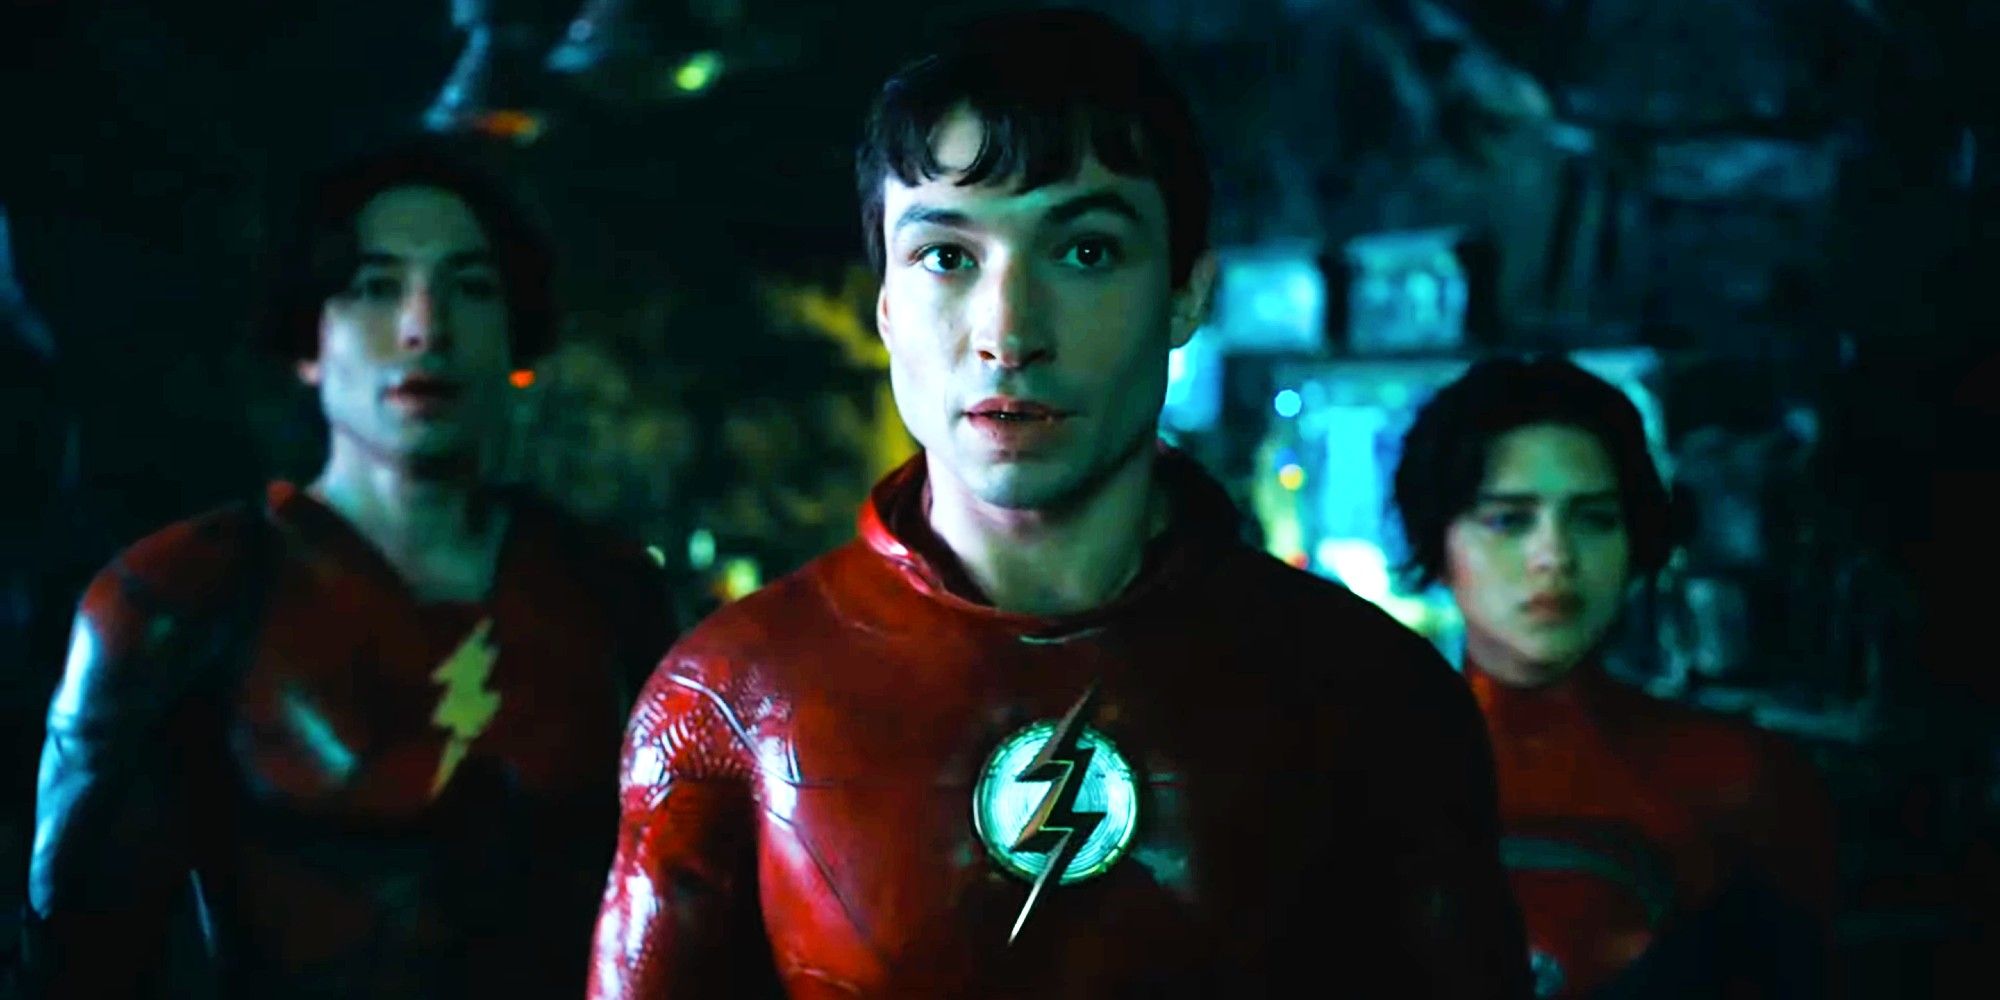 The Flash, Suoergirl, and another Flash in 2023's The Flash